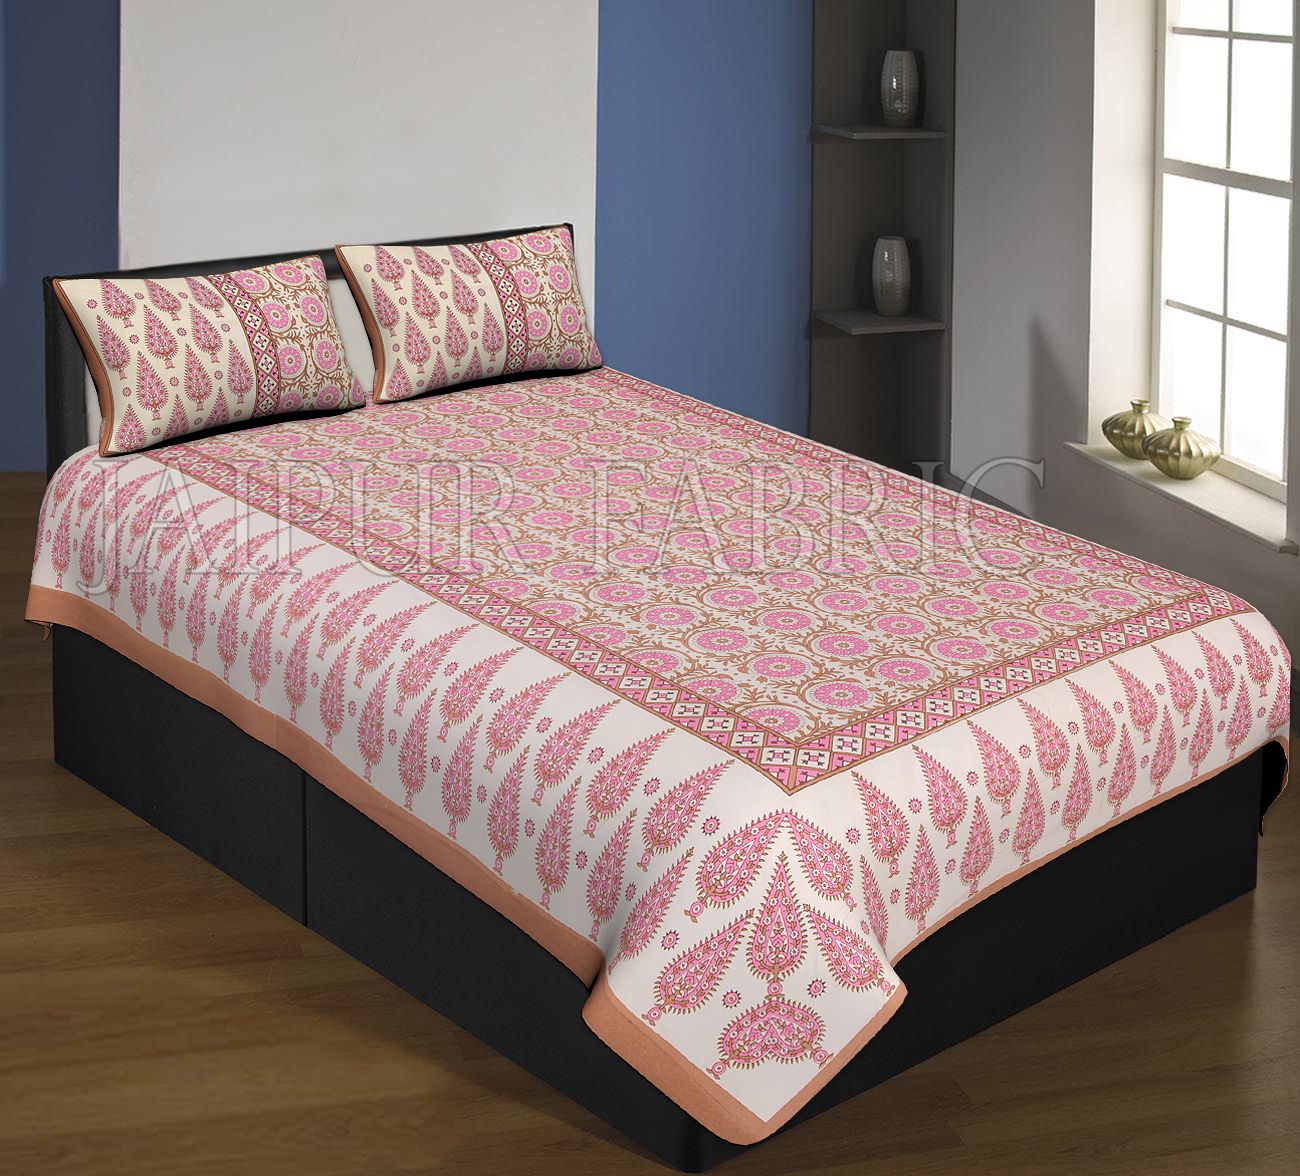 Brown Boarder Cream Base With Pink Leaf And Flower Pattern Single Bed Sheet With 2 Pillow Cover